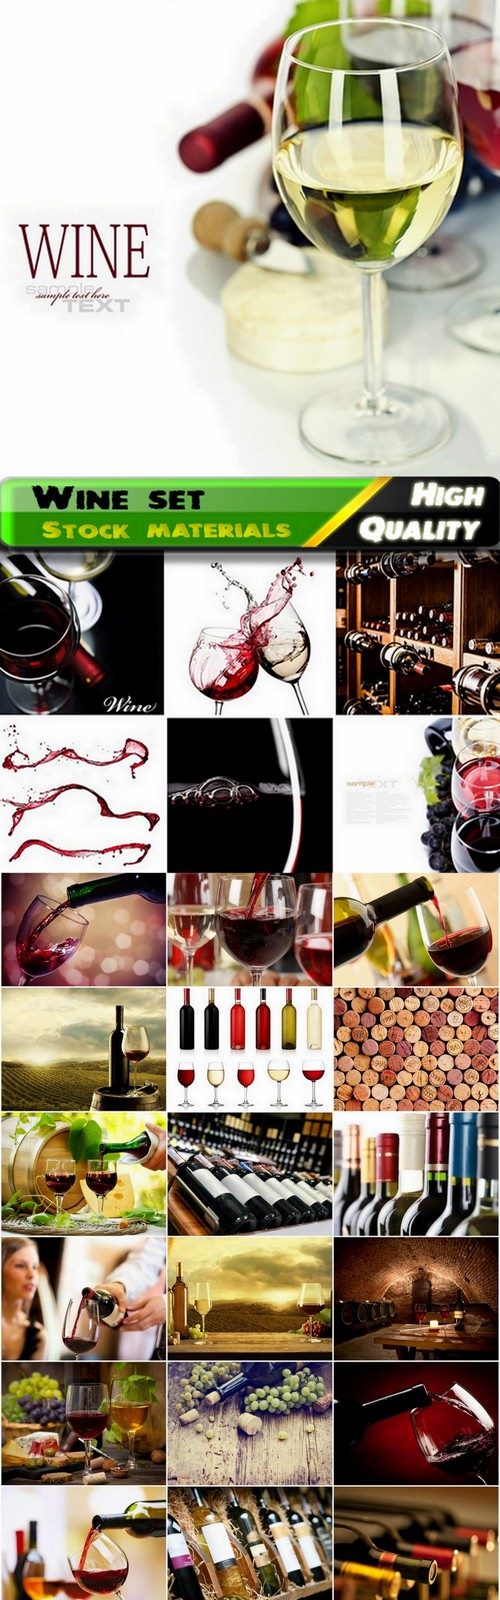 White and red wine in glasses and bottles and wine cellars - 25 HQ Jpg